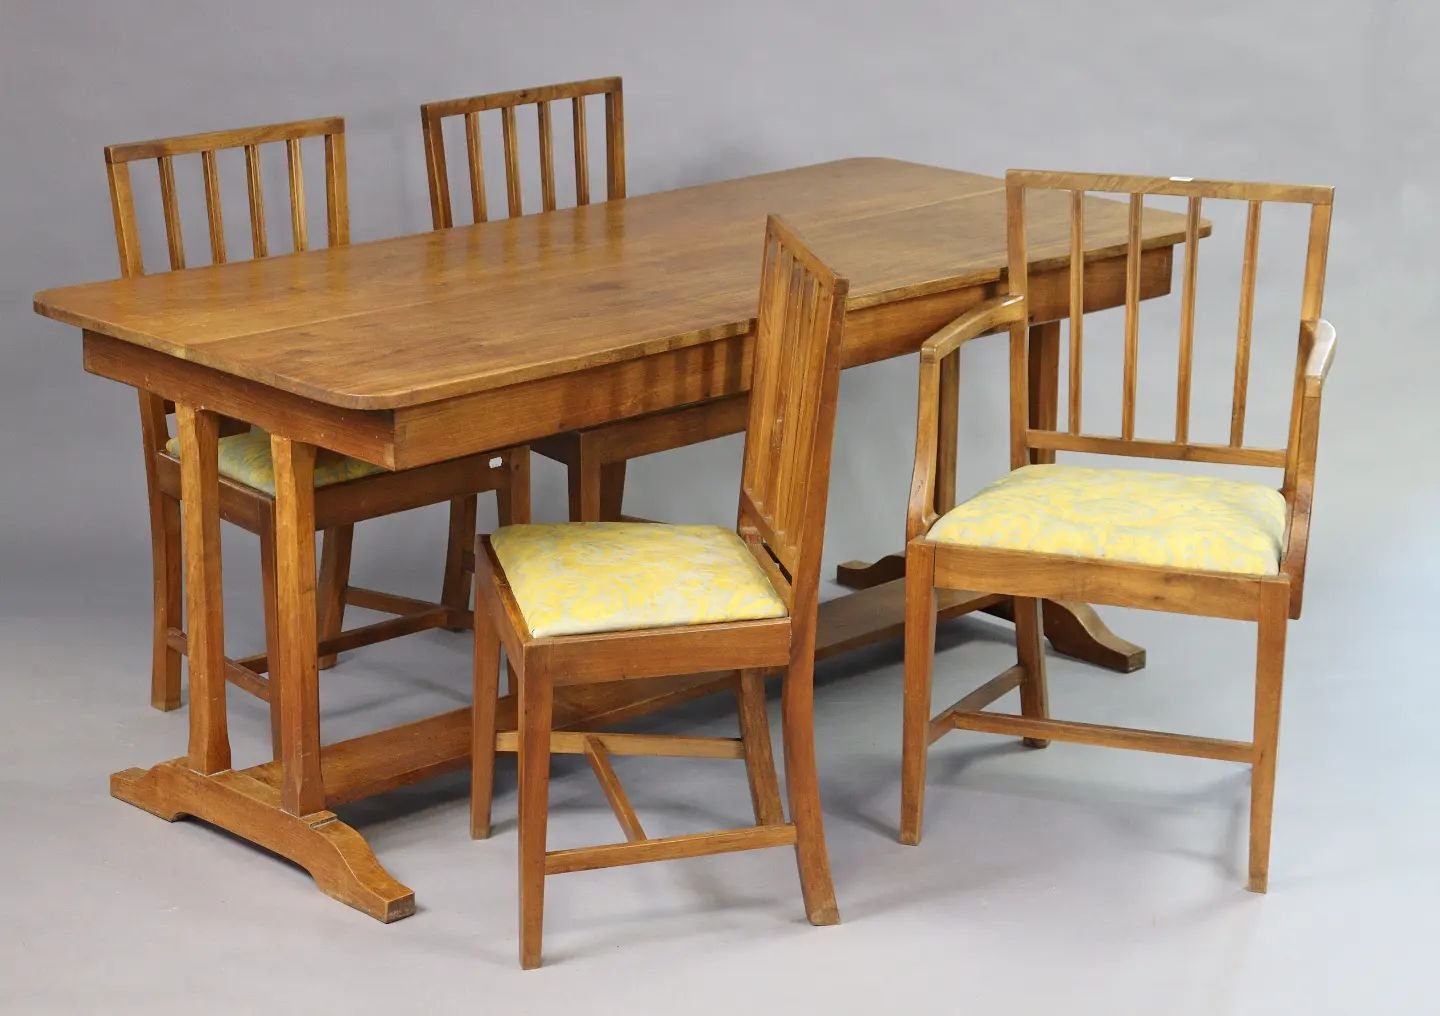 .
A good quality Cotswold School walnut dining table and chairs by Charles Herbert (Bert) Uzzell
Included in our 16th April Decorative &amp; Household Sale

Catalogue online later this week

.

.

.

.

.

.

.

.

.

#antiques #vintage #interiors #d